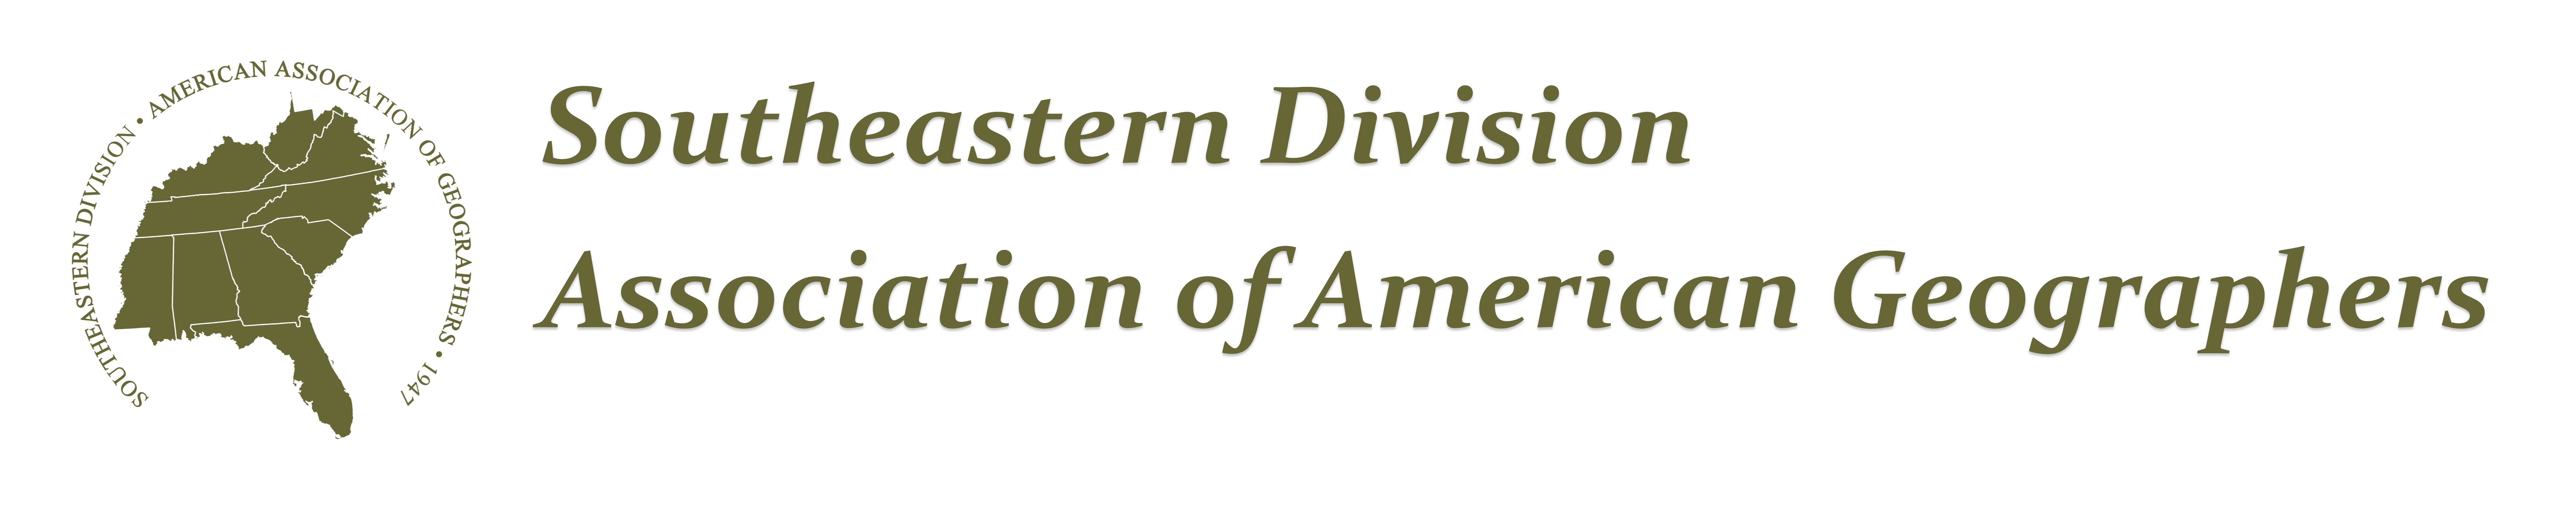 Southeastern Division, Association of American Geographers